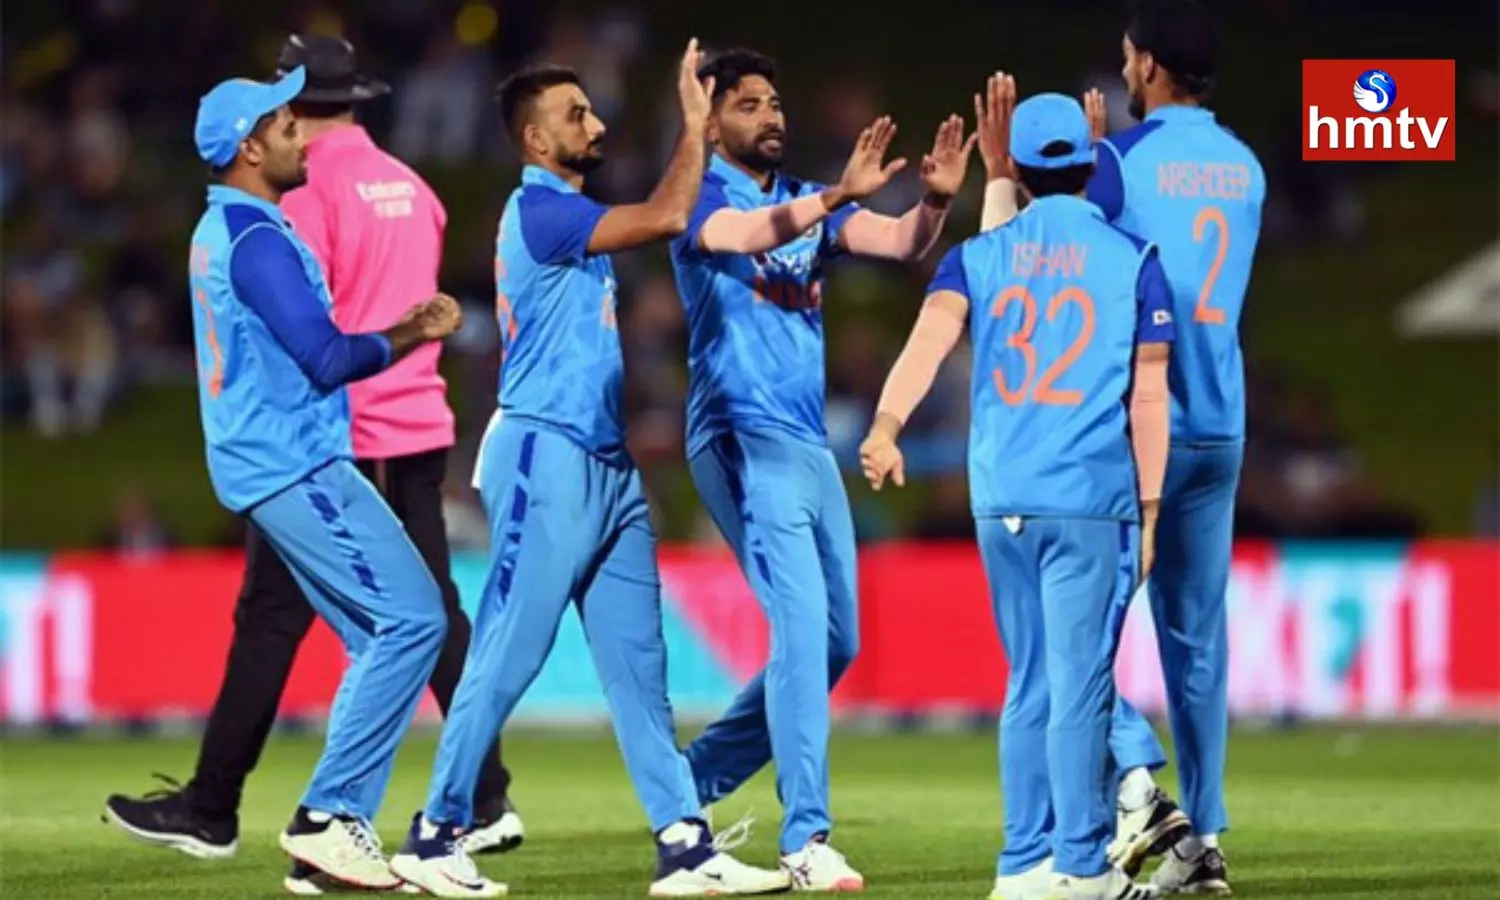 NZ vs IND Match Ends in a Tie DLS India win Series 1-0